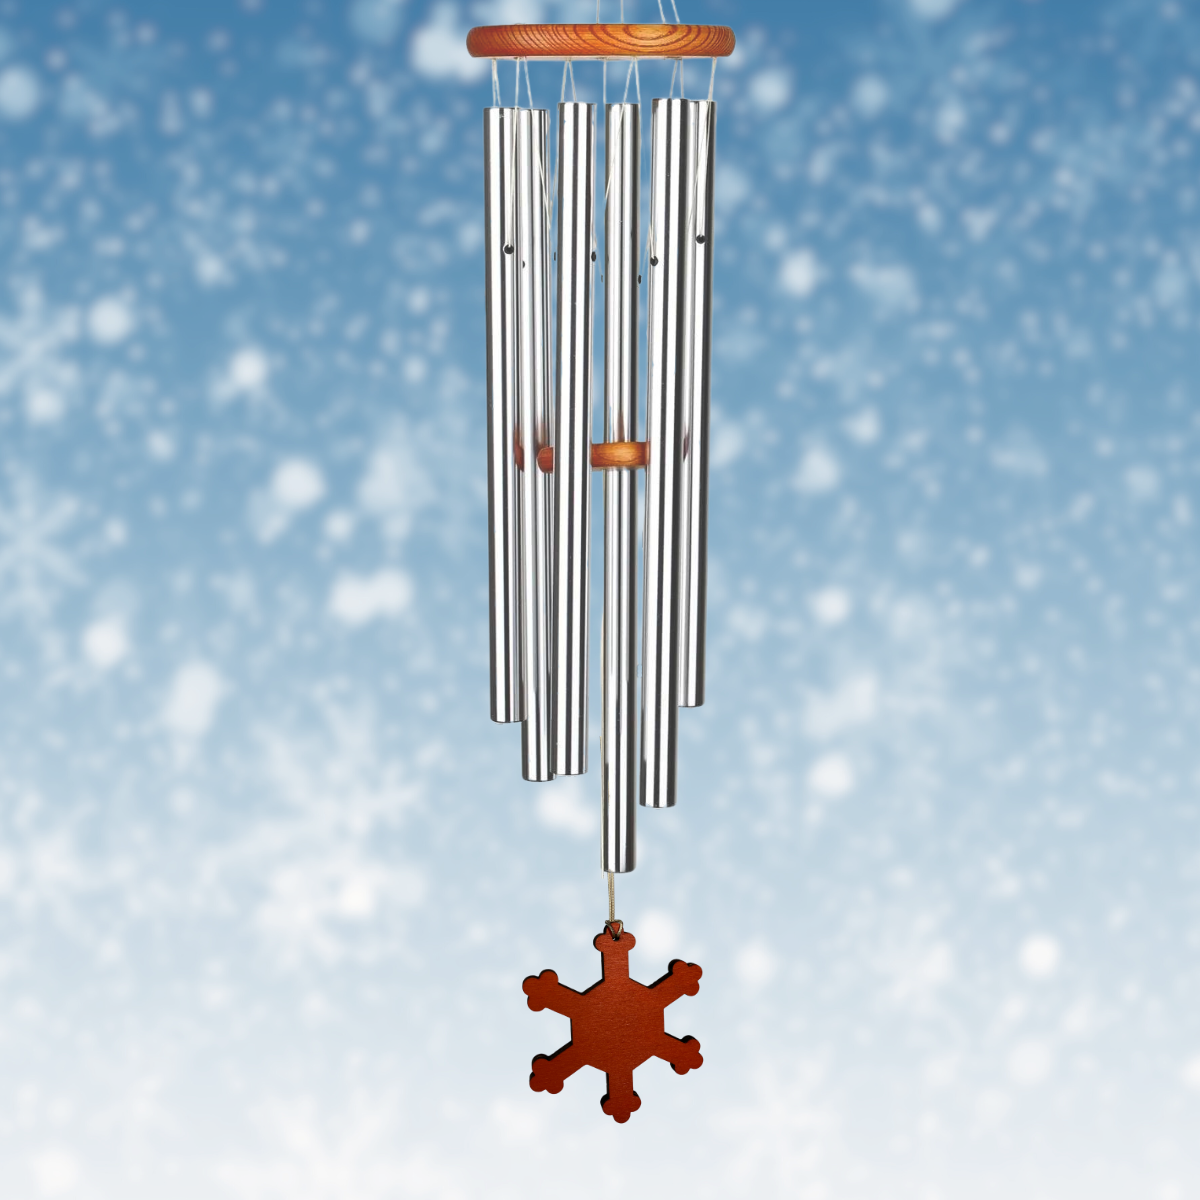 Amazing Grace 40 Inch Wind Chime - Engravable Snowflake Sail - Silver